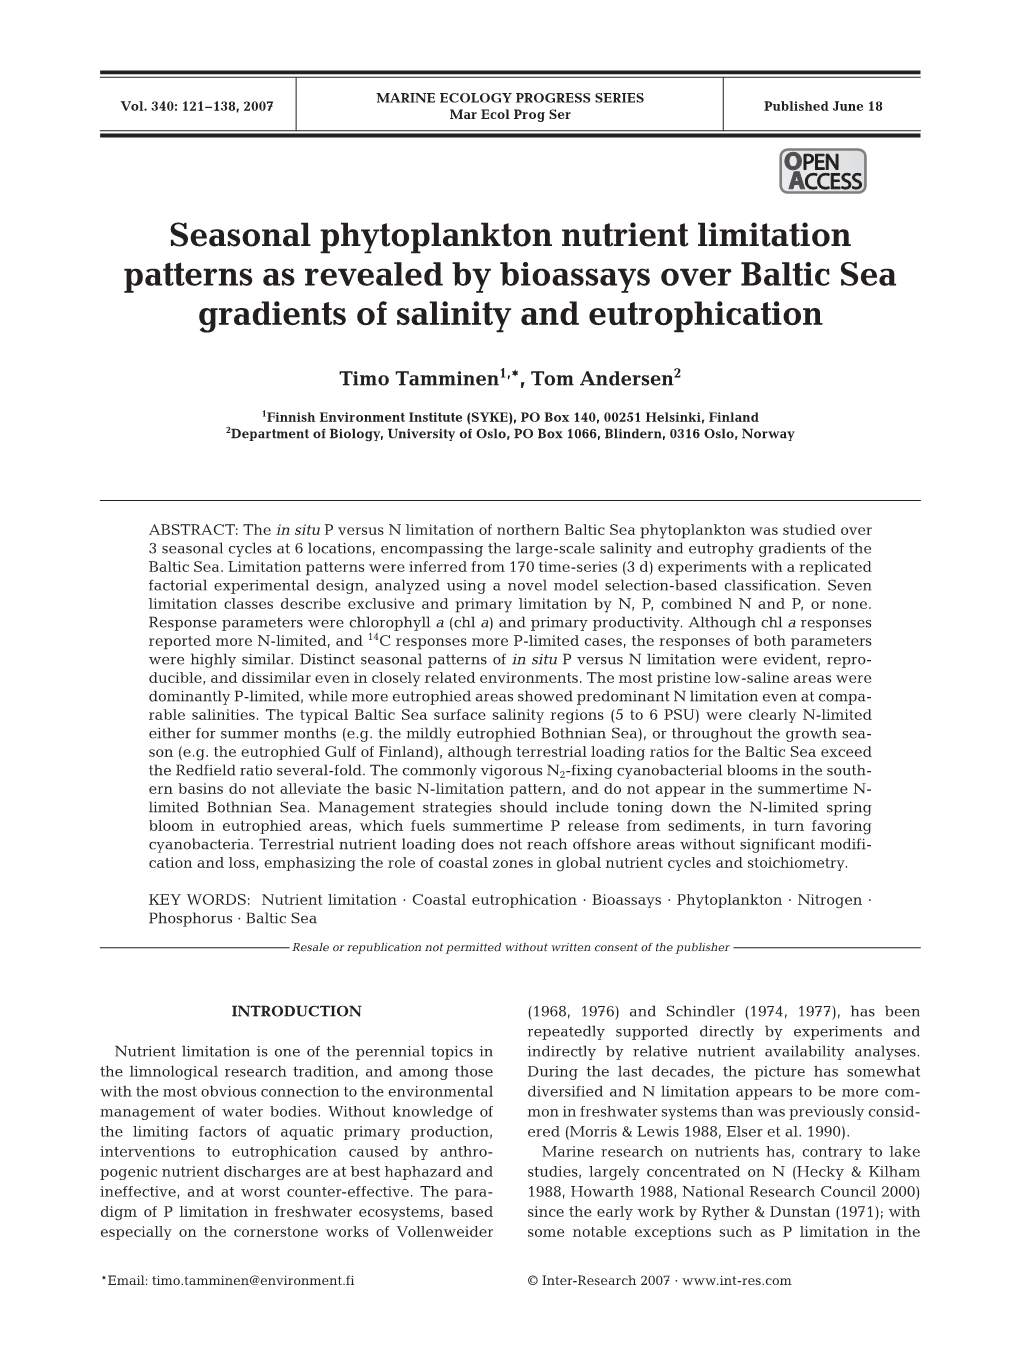 Seasonal Phytoplankton Nutrient Limitation Patterns As Revealed by Bioassays Over Baltic Sea Gradients of Salinity and Eutrophication